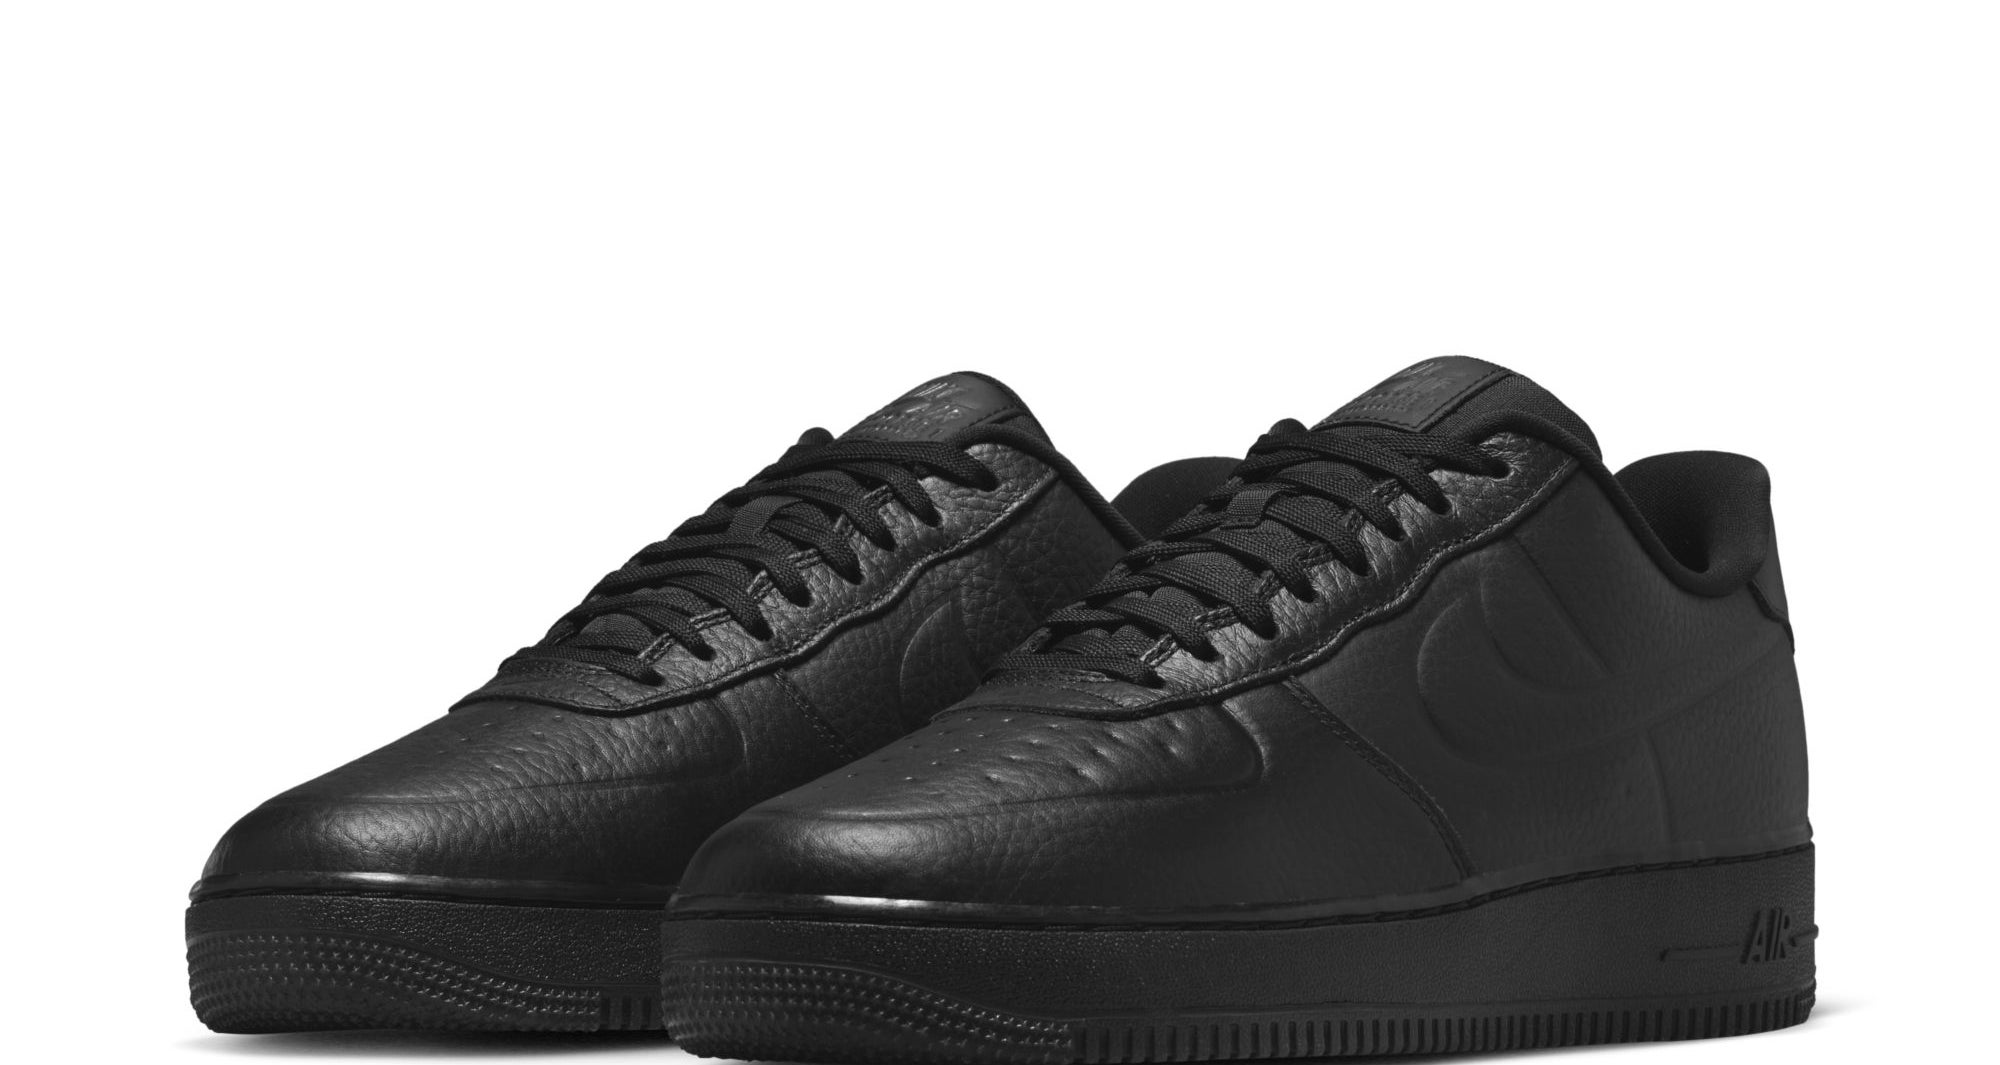 In defense of the triple-black Nike Air Force 1, a shoe whose